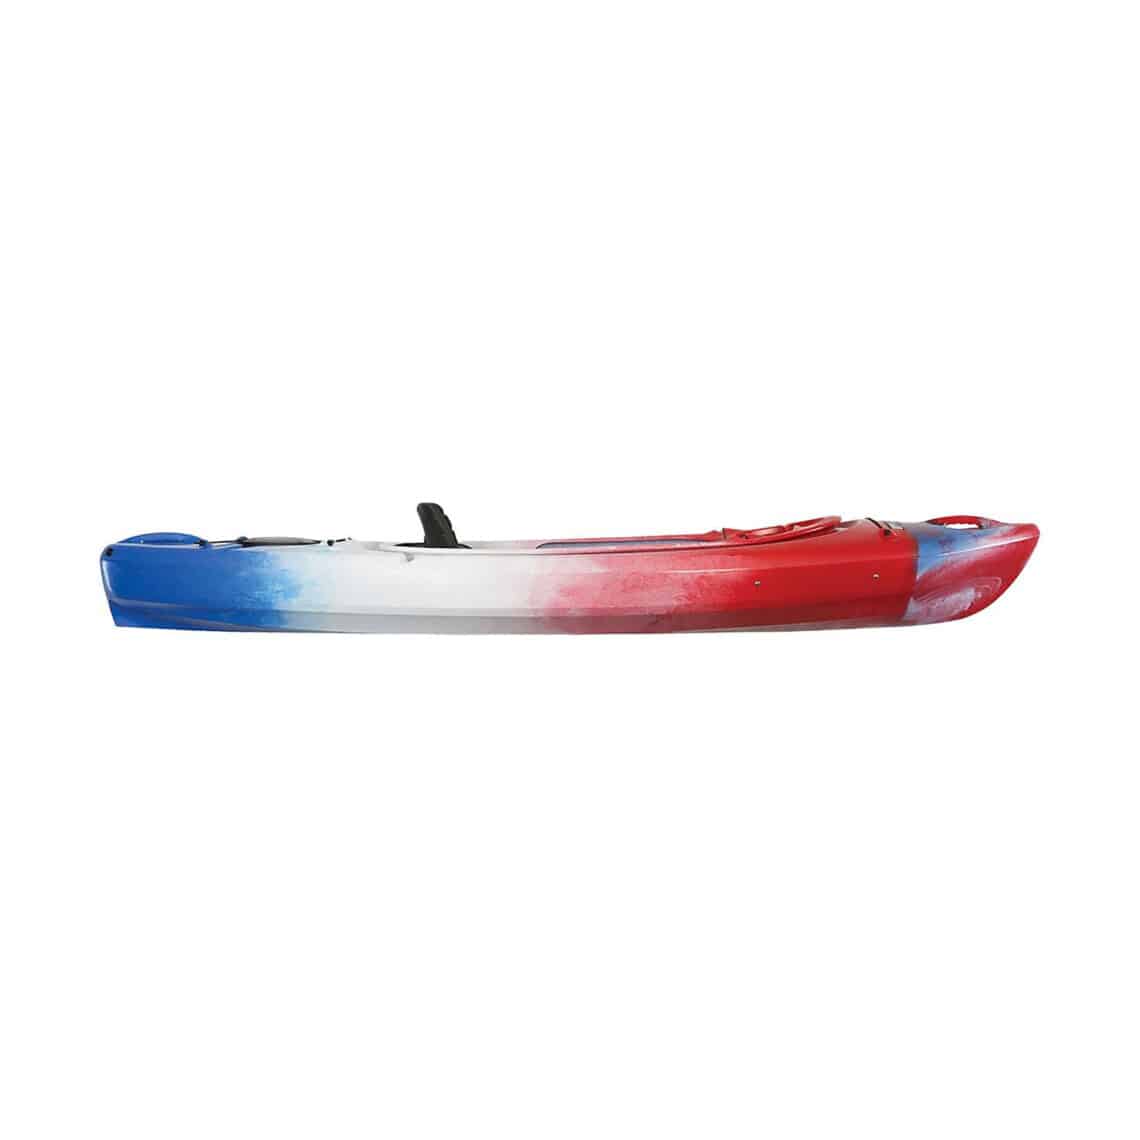 PELICAN LIBERTY 9.5 RED, WHITE AND BLUE KAYAK